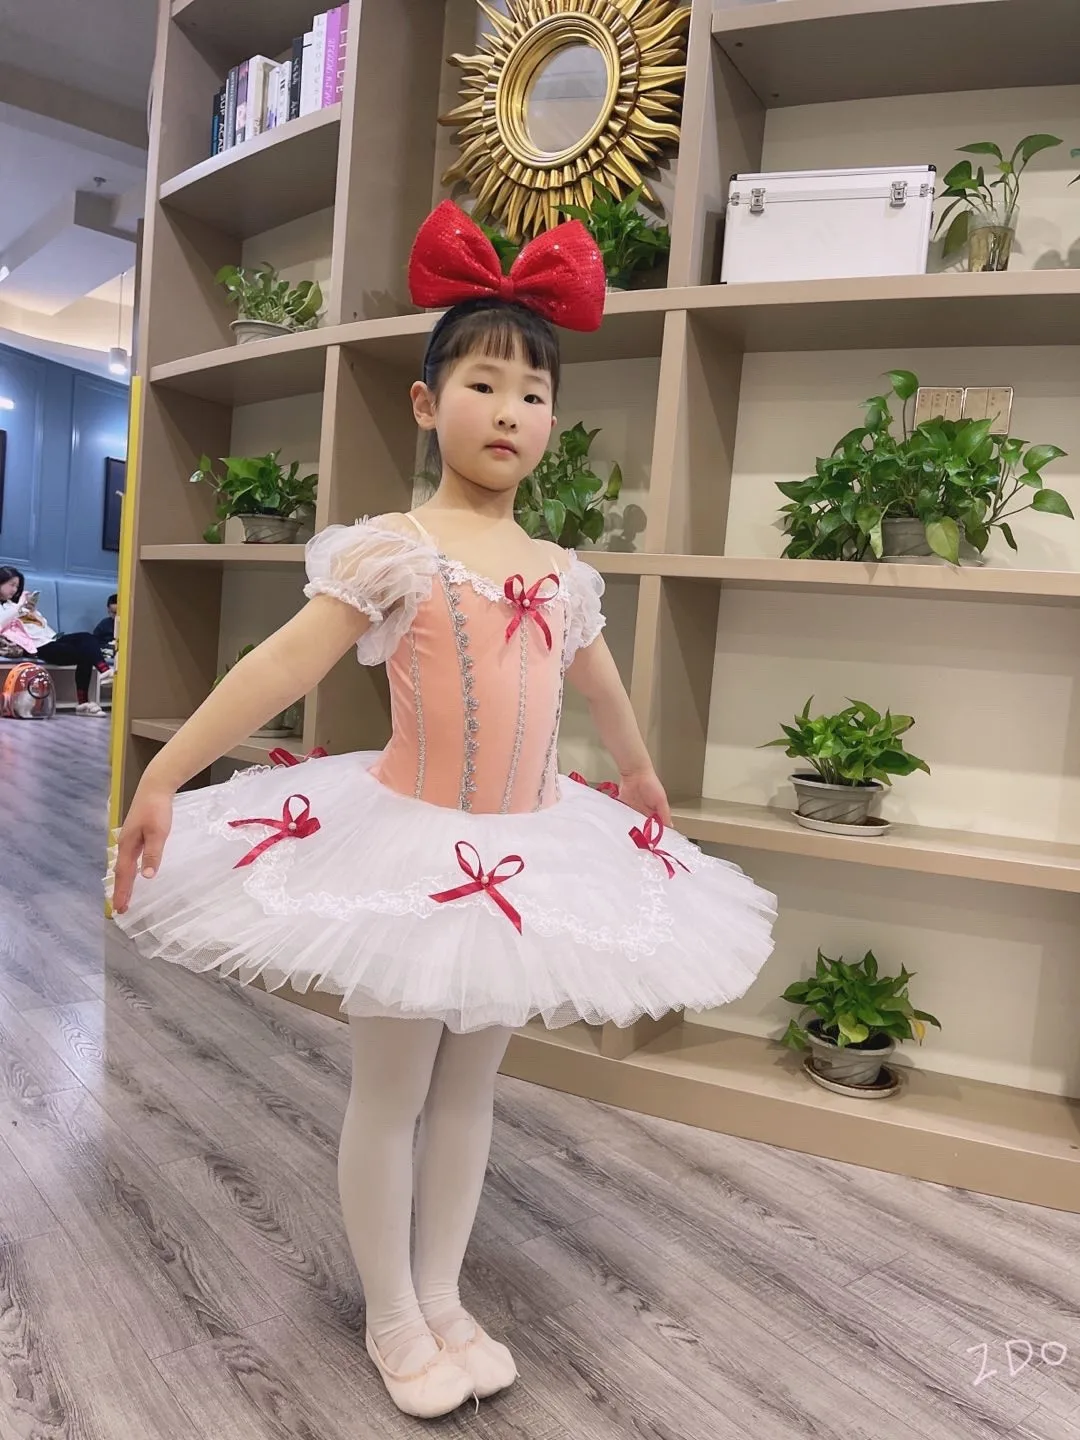 Puff Sleeves Classical Ballet Tutu Girls Ballet Dress Professional Pink Romantic Ballet Costume Dance Bodysuit Performance Cloth adult professional ballet tutu beige cream girls peformance tutu puffy flower fairy doll classical ballet stage costume red